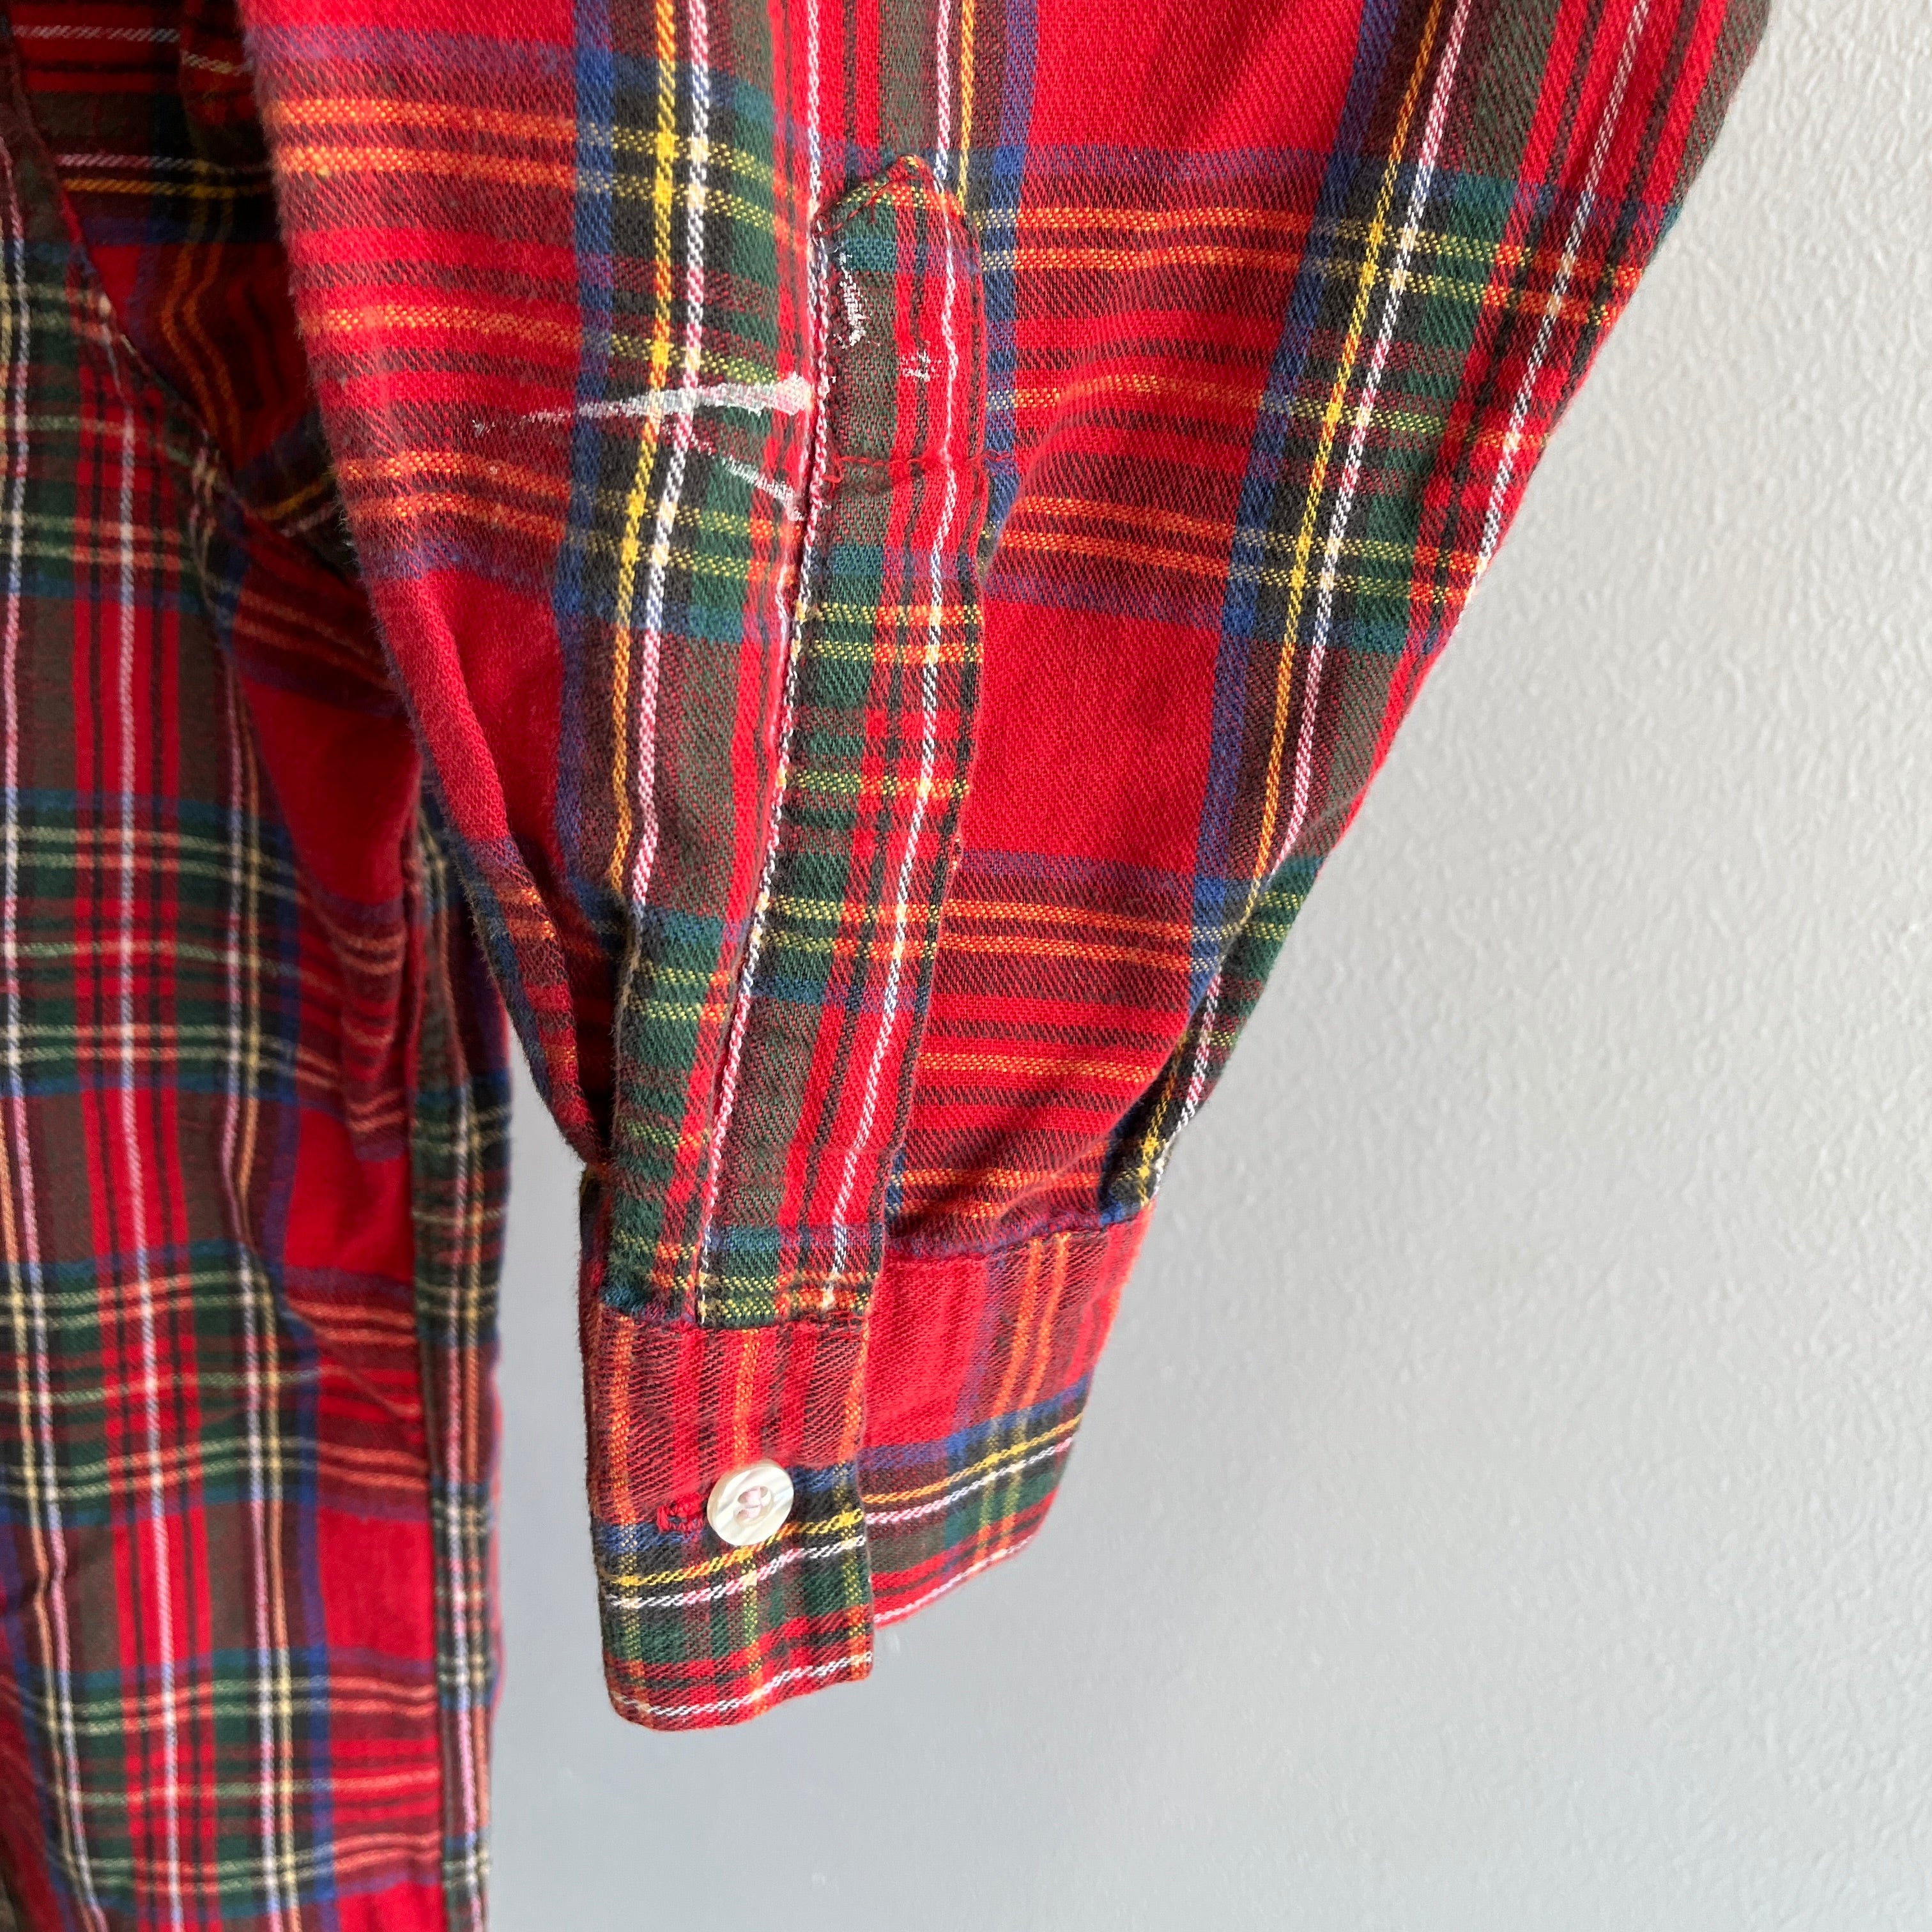 1950/60s L.L. Bean USA MADE Single Pocket Cotton Flannel - THIS!!!!